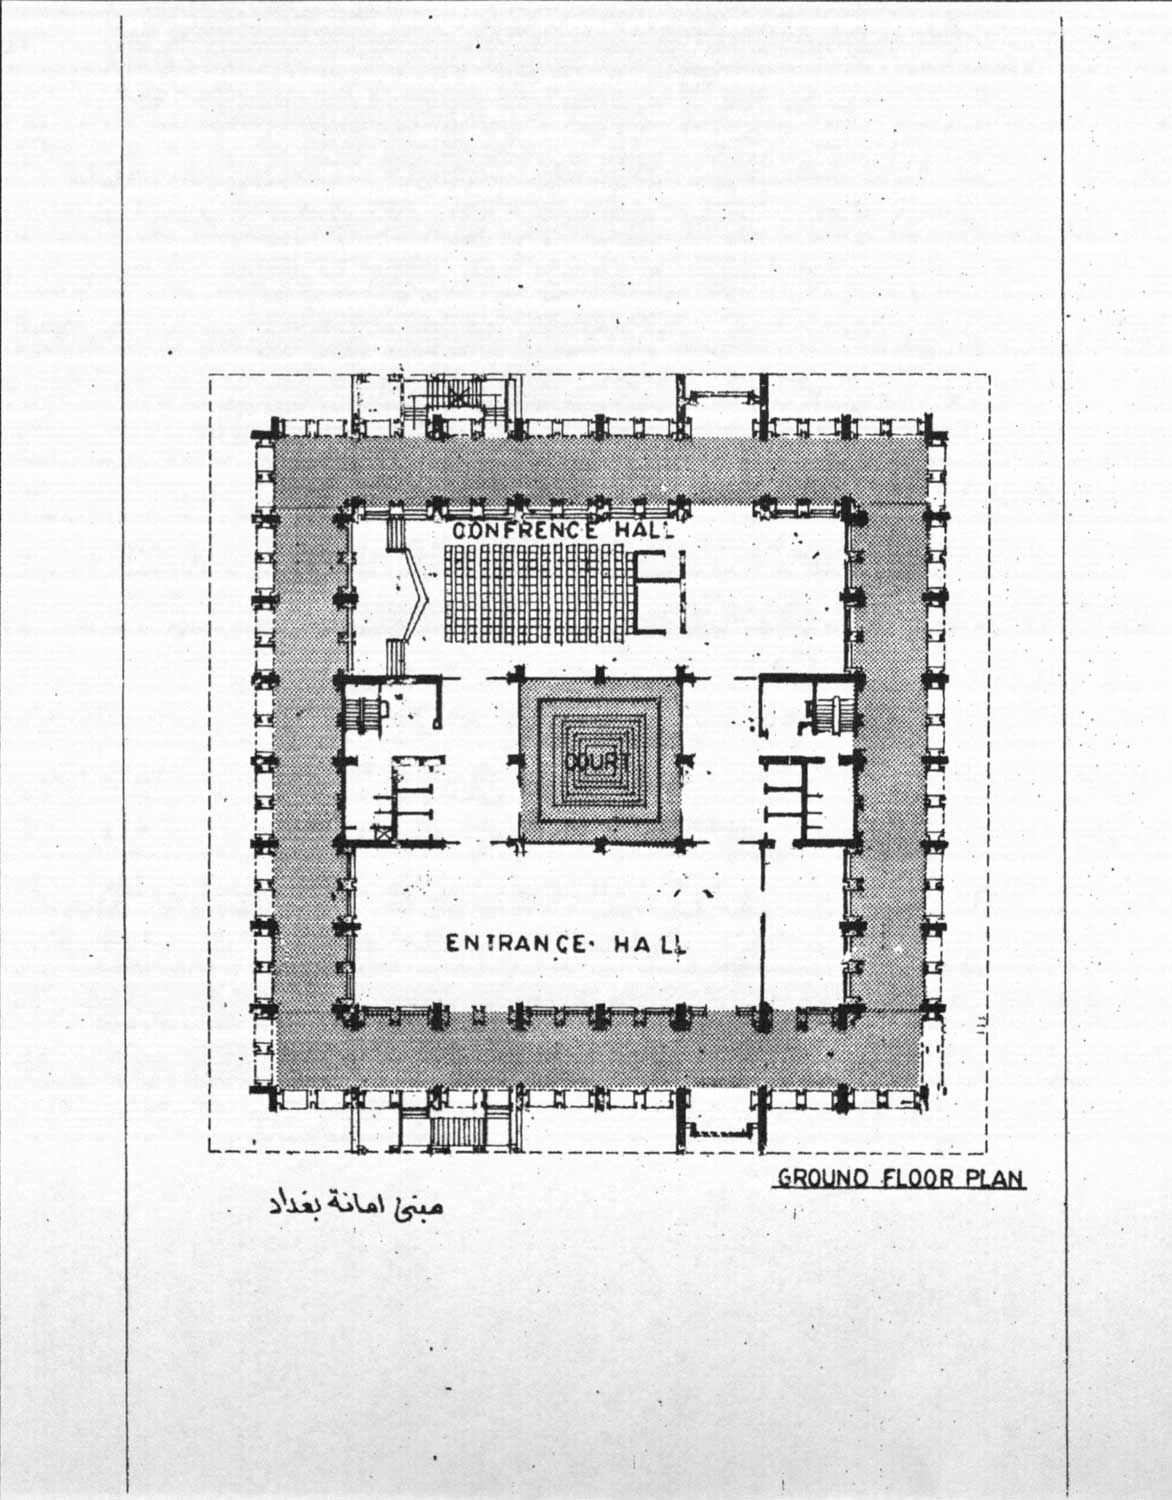 Ground Floor plan for the Mayor's Office Building, showing the conference hall, court, and entrance hall. The drawing includes text in English and Arabic.